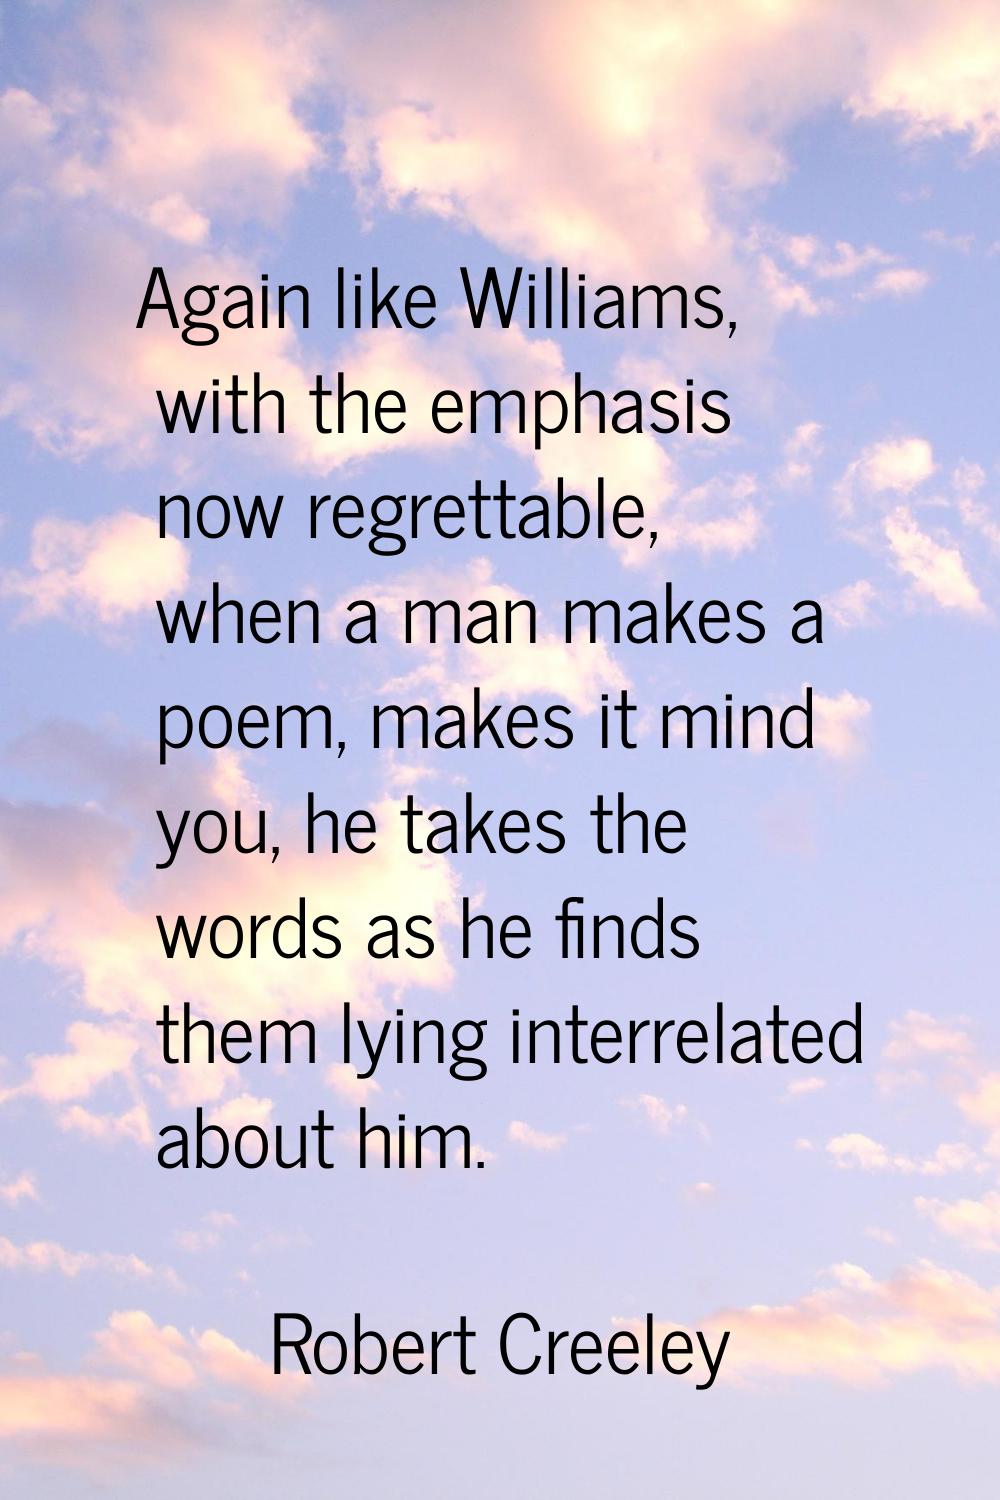 Again like Williams, with the emphasis now regrettable, when a man makes a poem, makes it mind you,